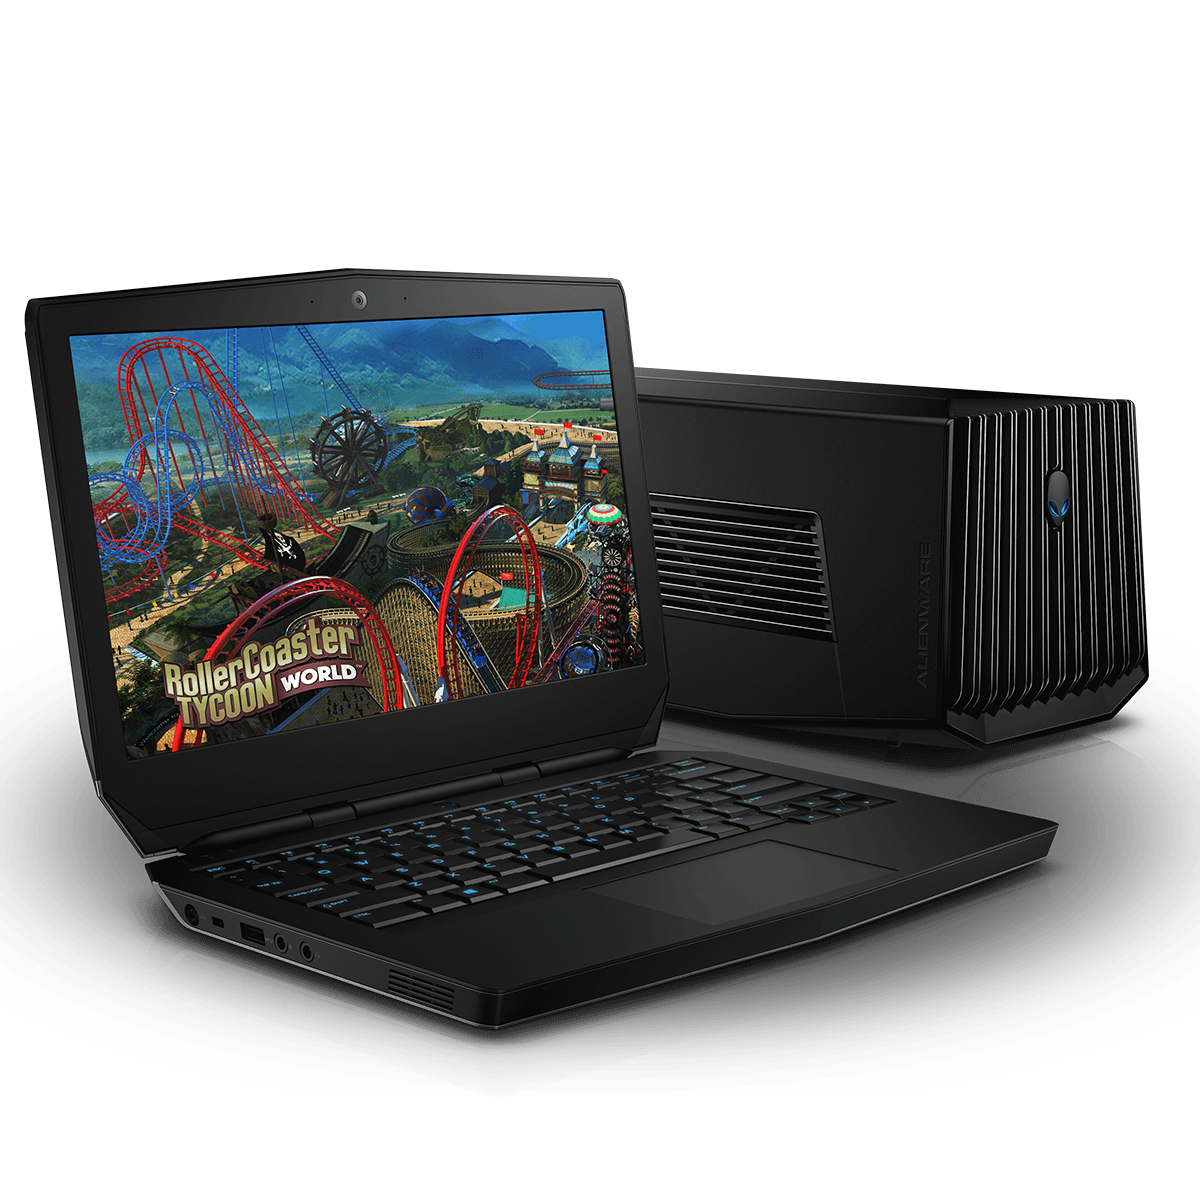 Gaming 13-inch laptop launch landing page